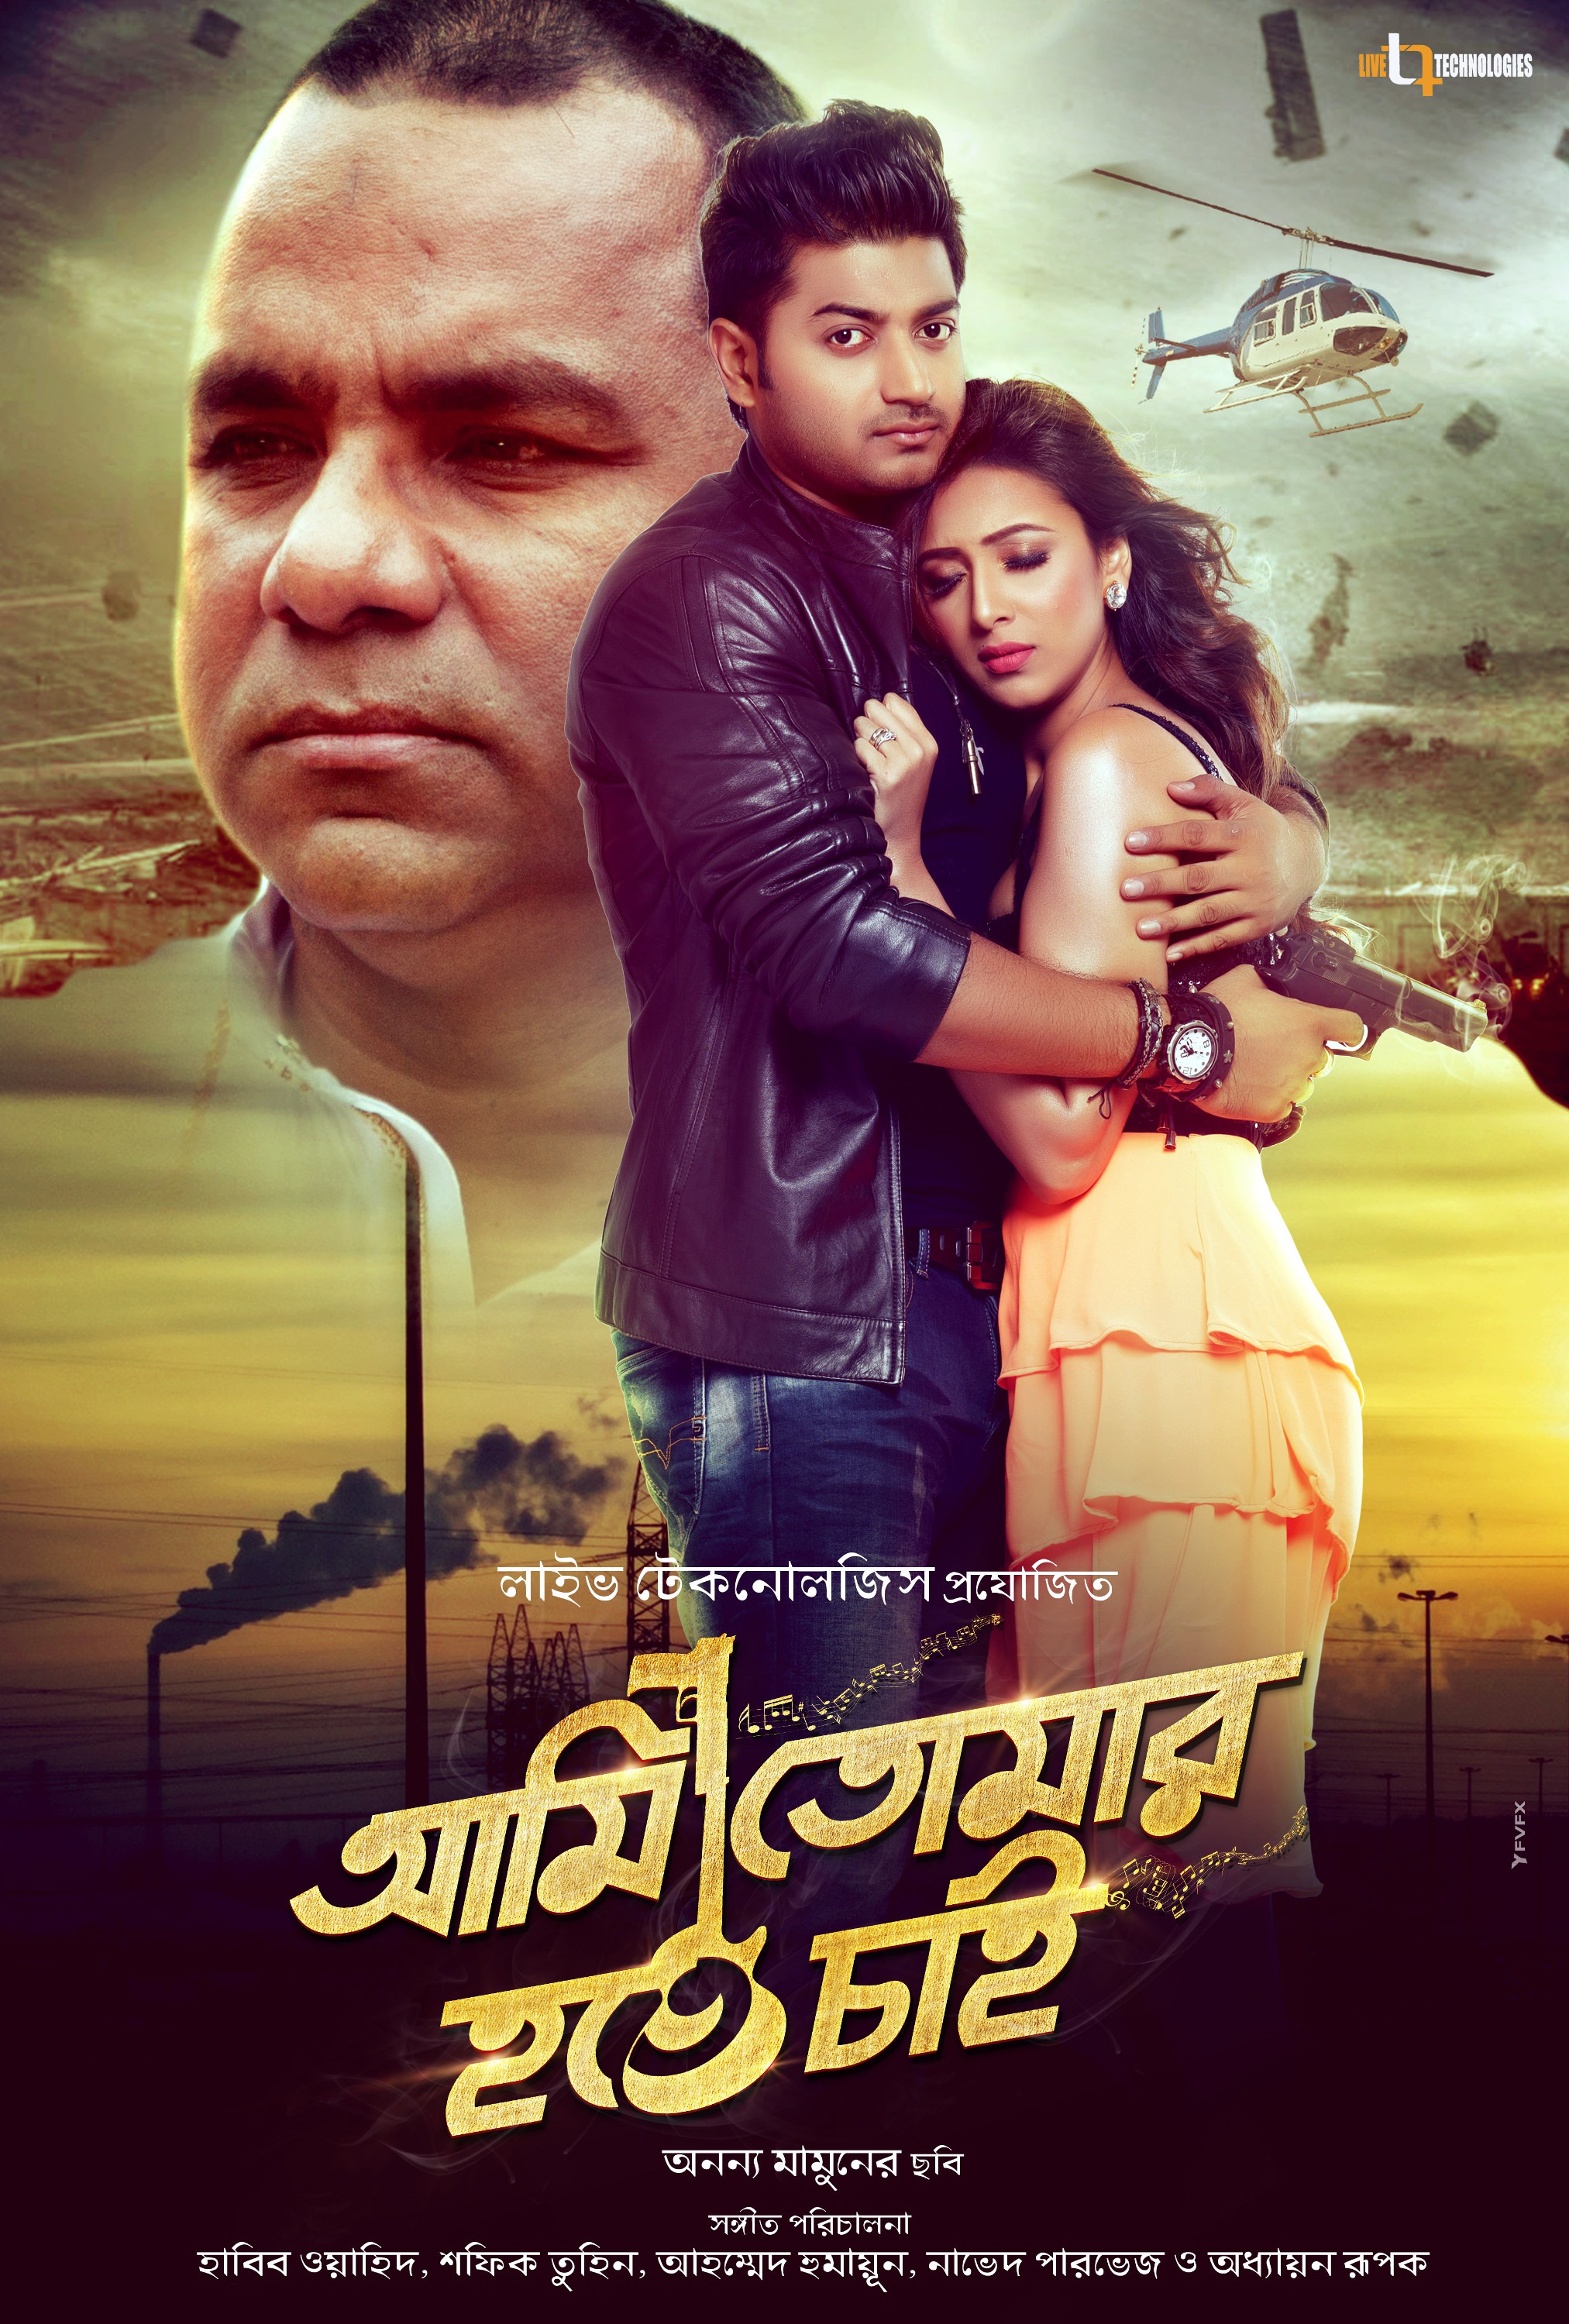 Mega Sized Movie Poster Image for Ami Tomar Hote Chai (#9 of 11)